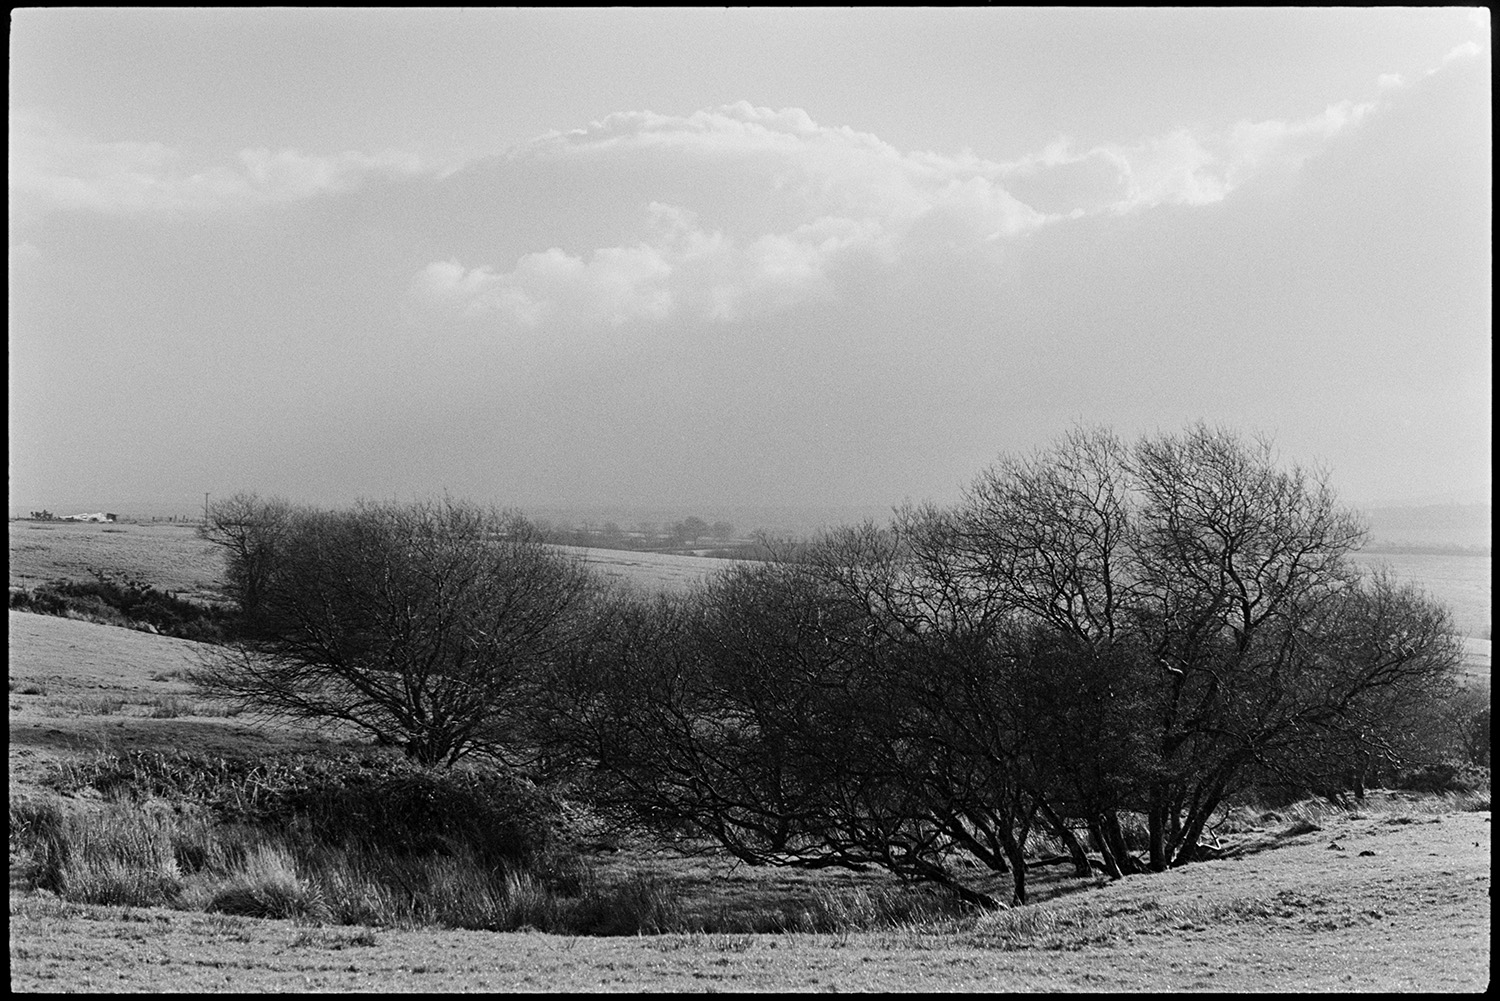 Cloudy views across moor couple walking with pram. 
[Small trees and rough ground on Hatherleigh Moor, with clouds in the sky above.]